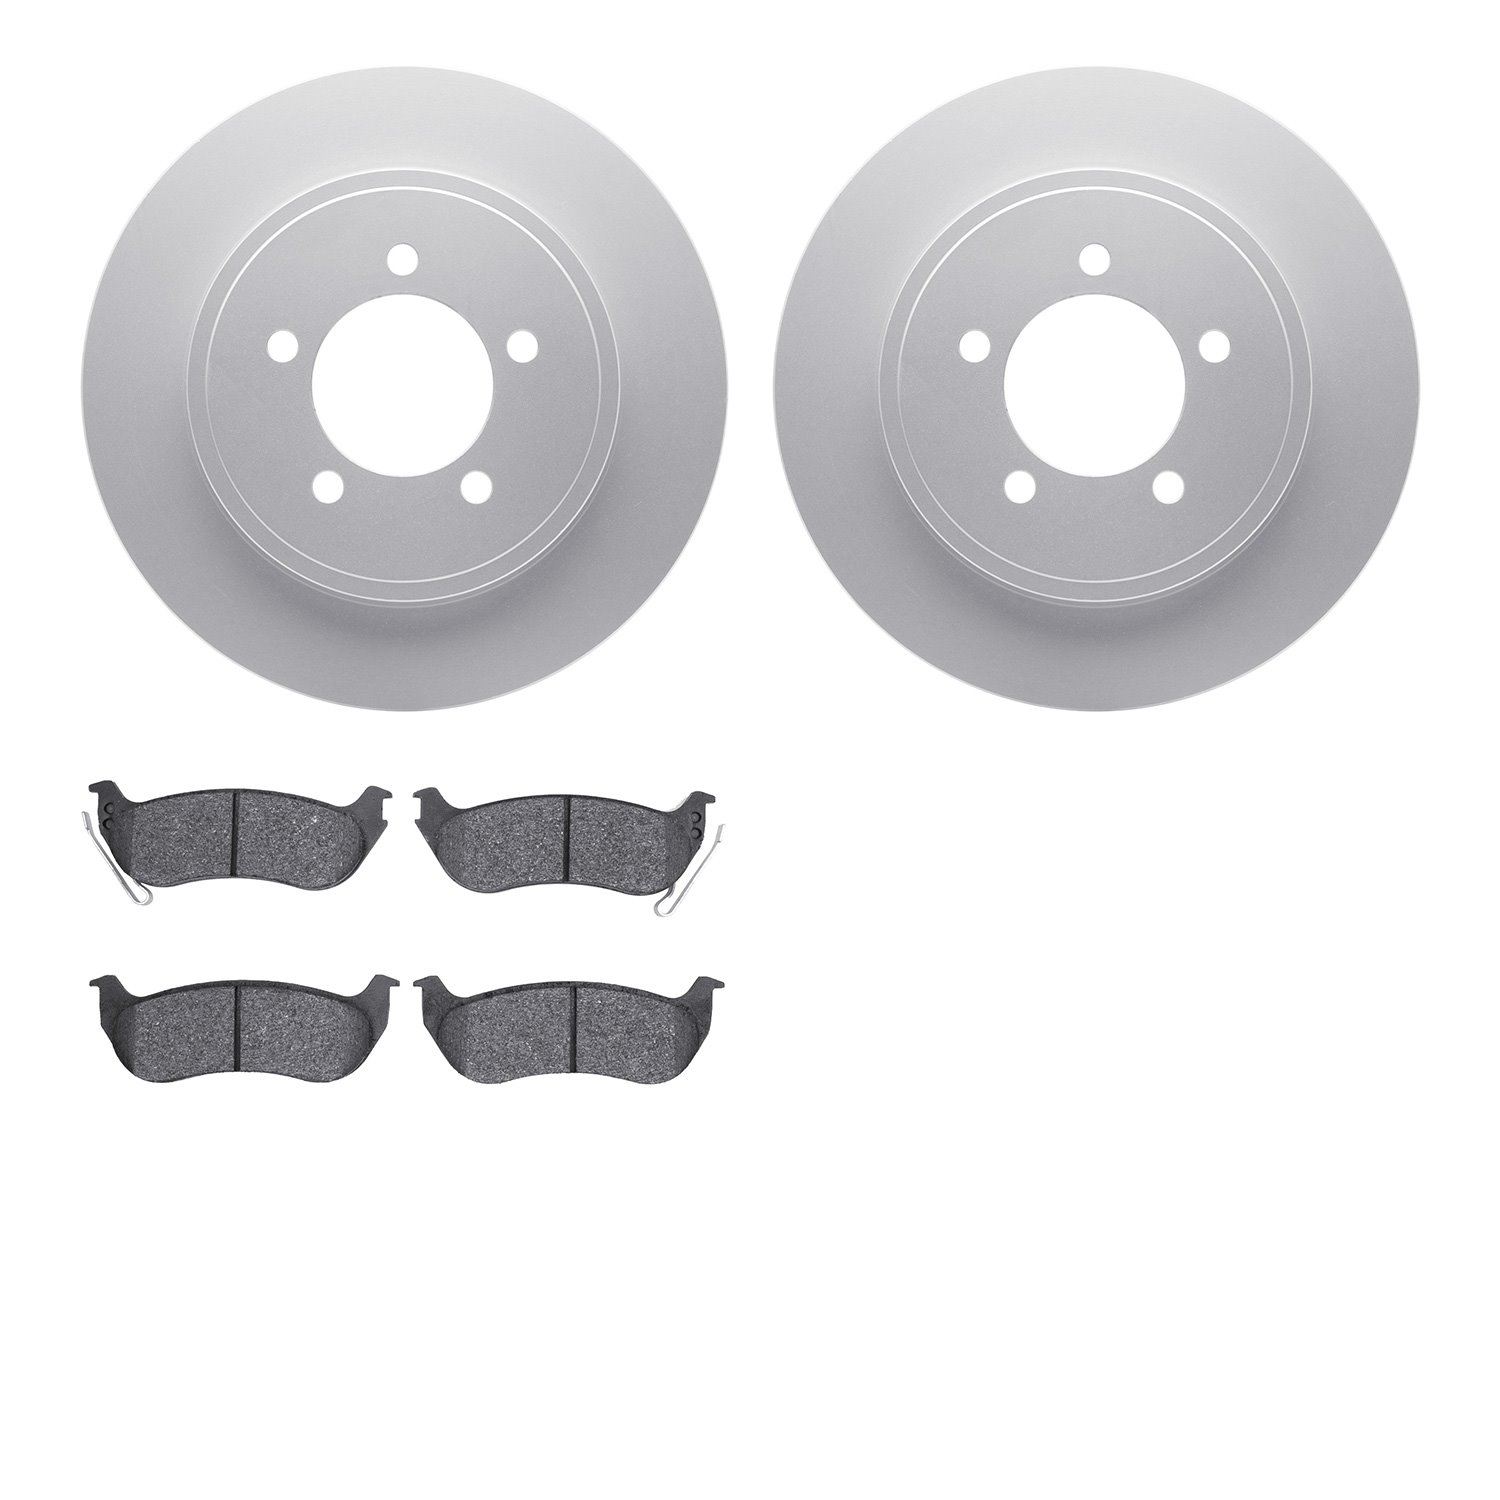 4402-54040 Geospec Brake Rotors with Ultimate-Duty Brake Pads Kit, 2006-2010 Ford/Lincoln/Mercury/Mazda, Position: Rear